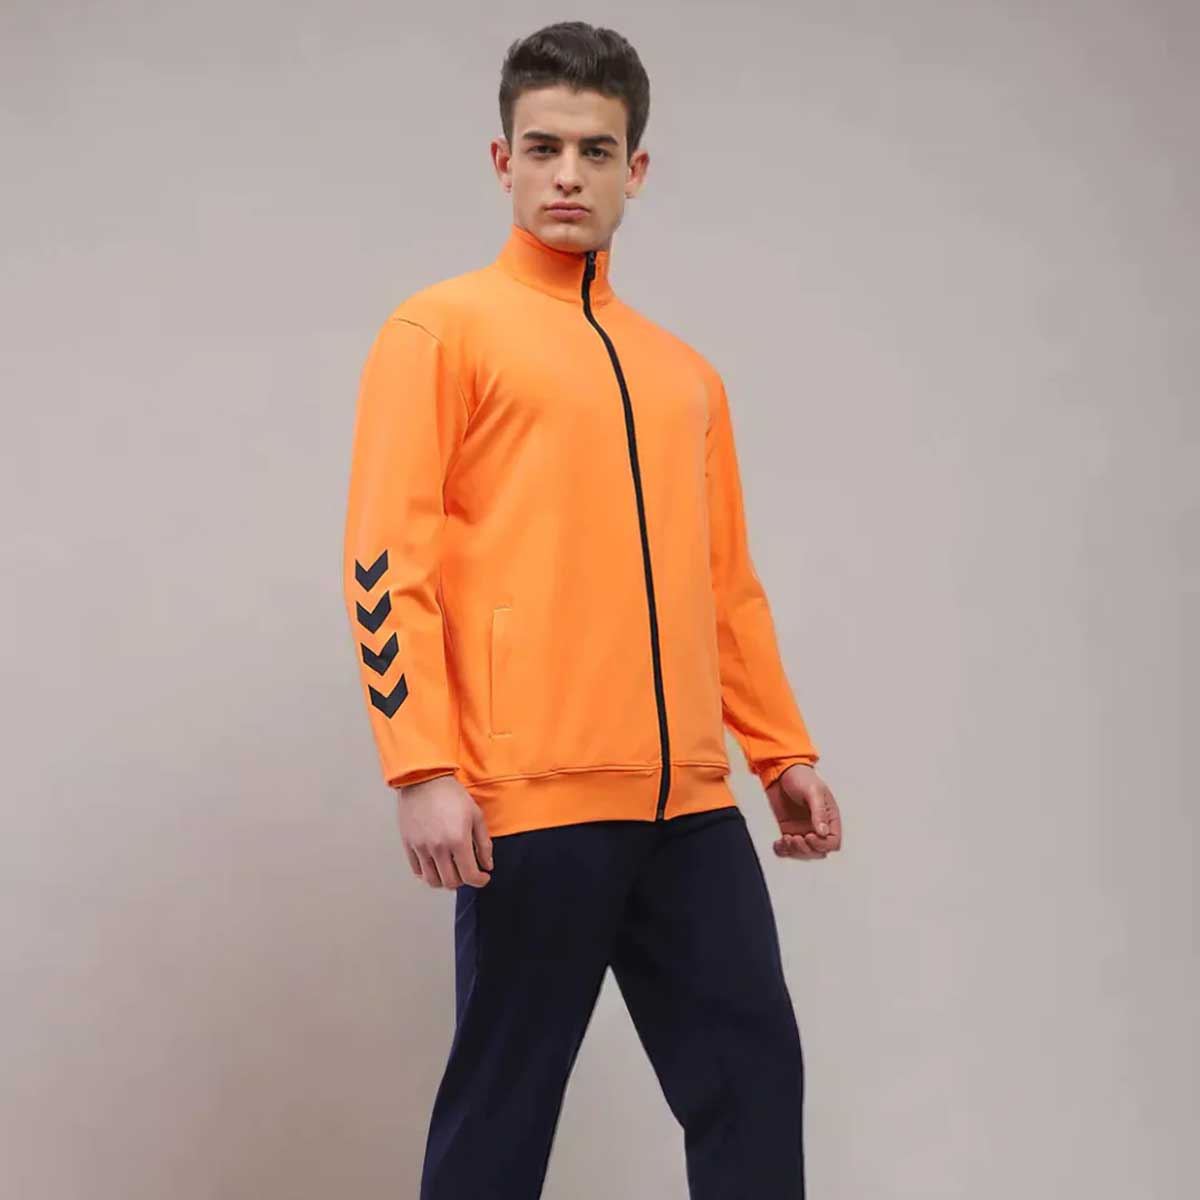 Promotional Tracksuits Manufacturers in Dzerzhinsk